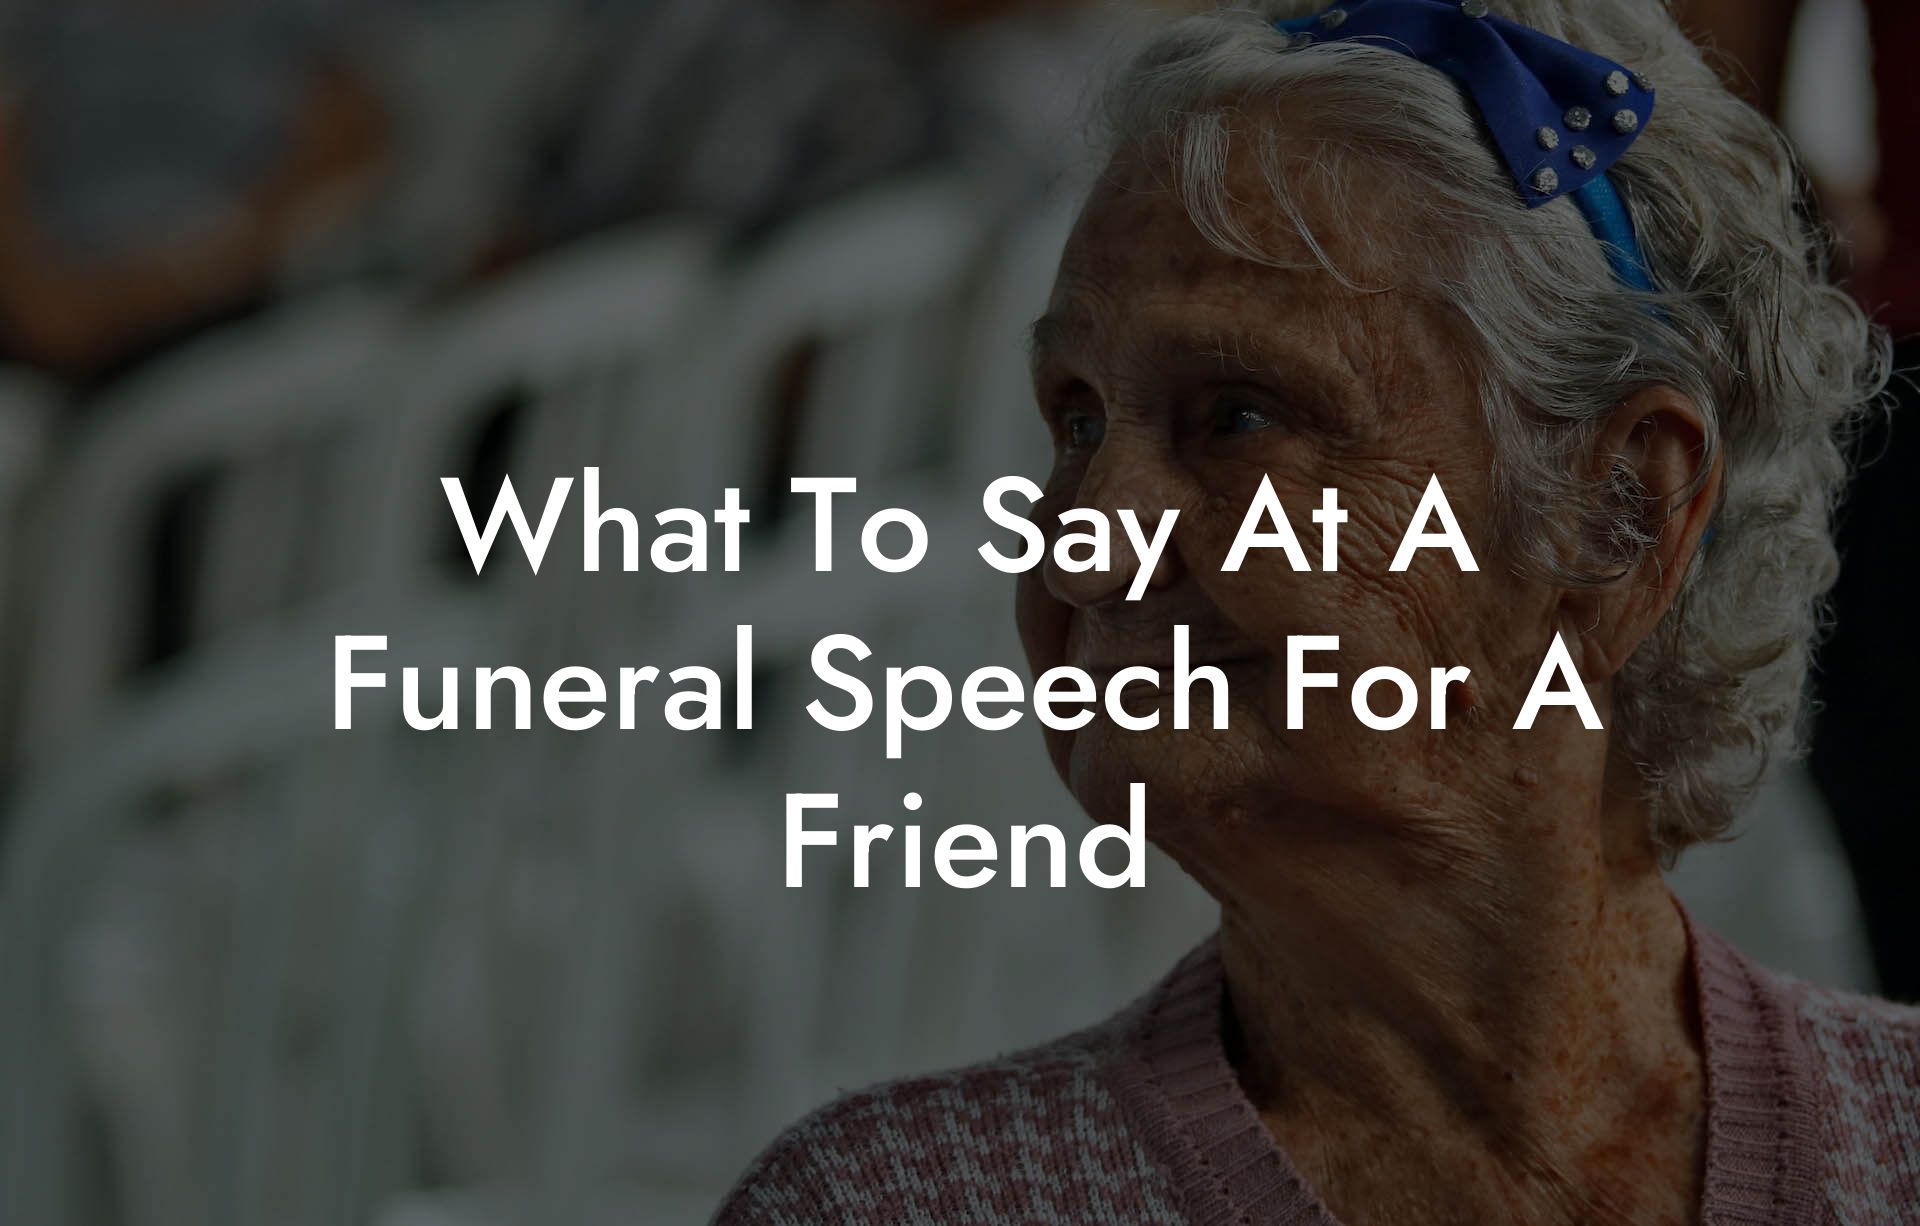 What To Say At A Funeral Speech For A Friend